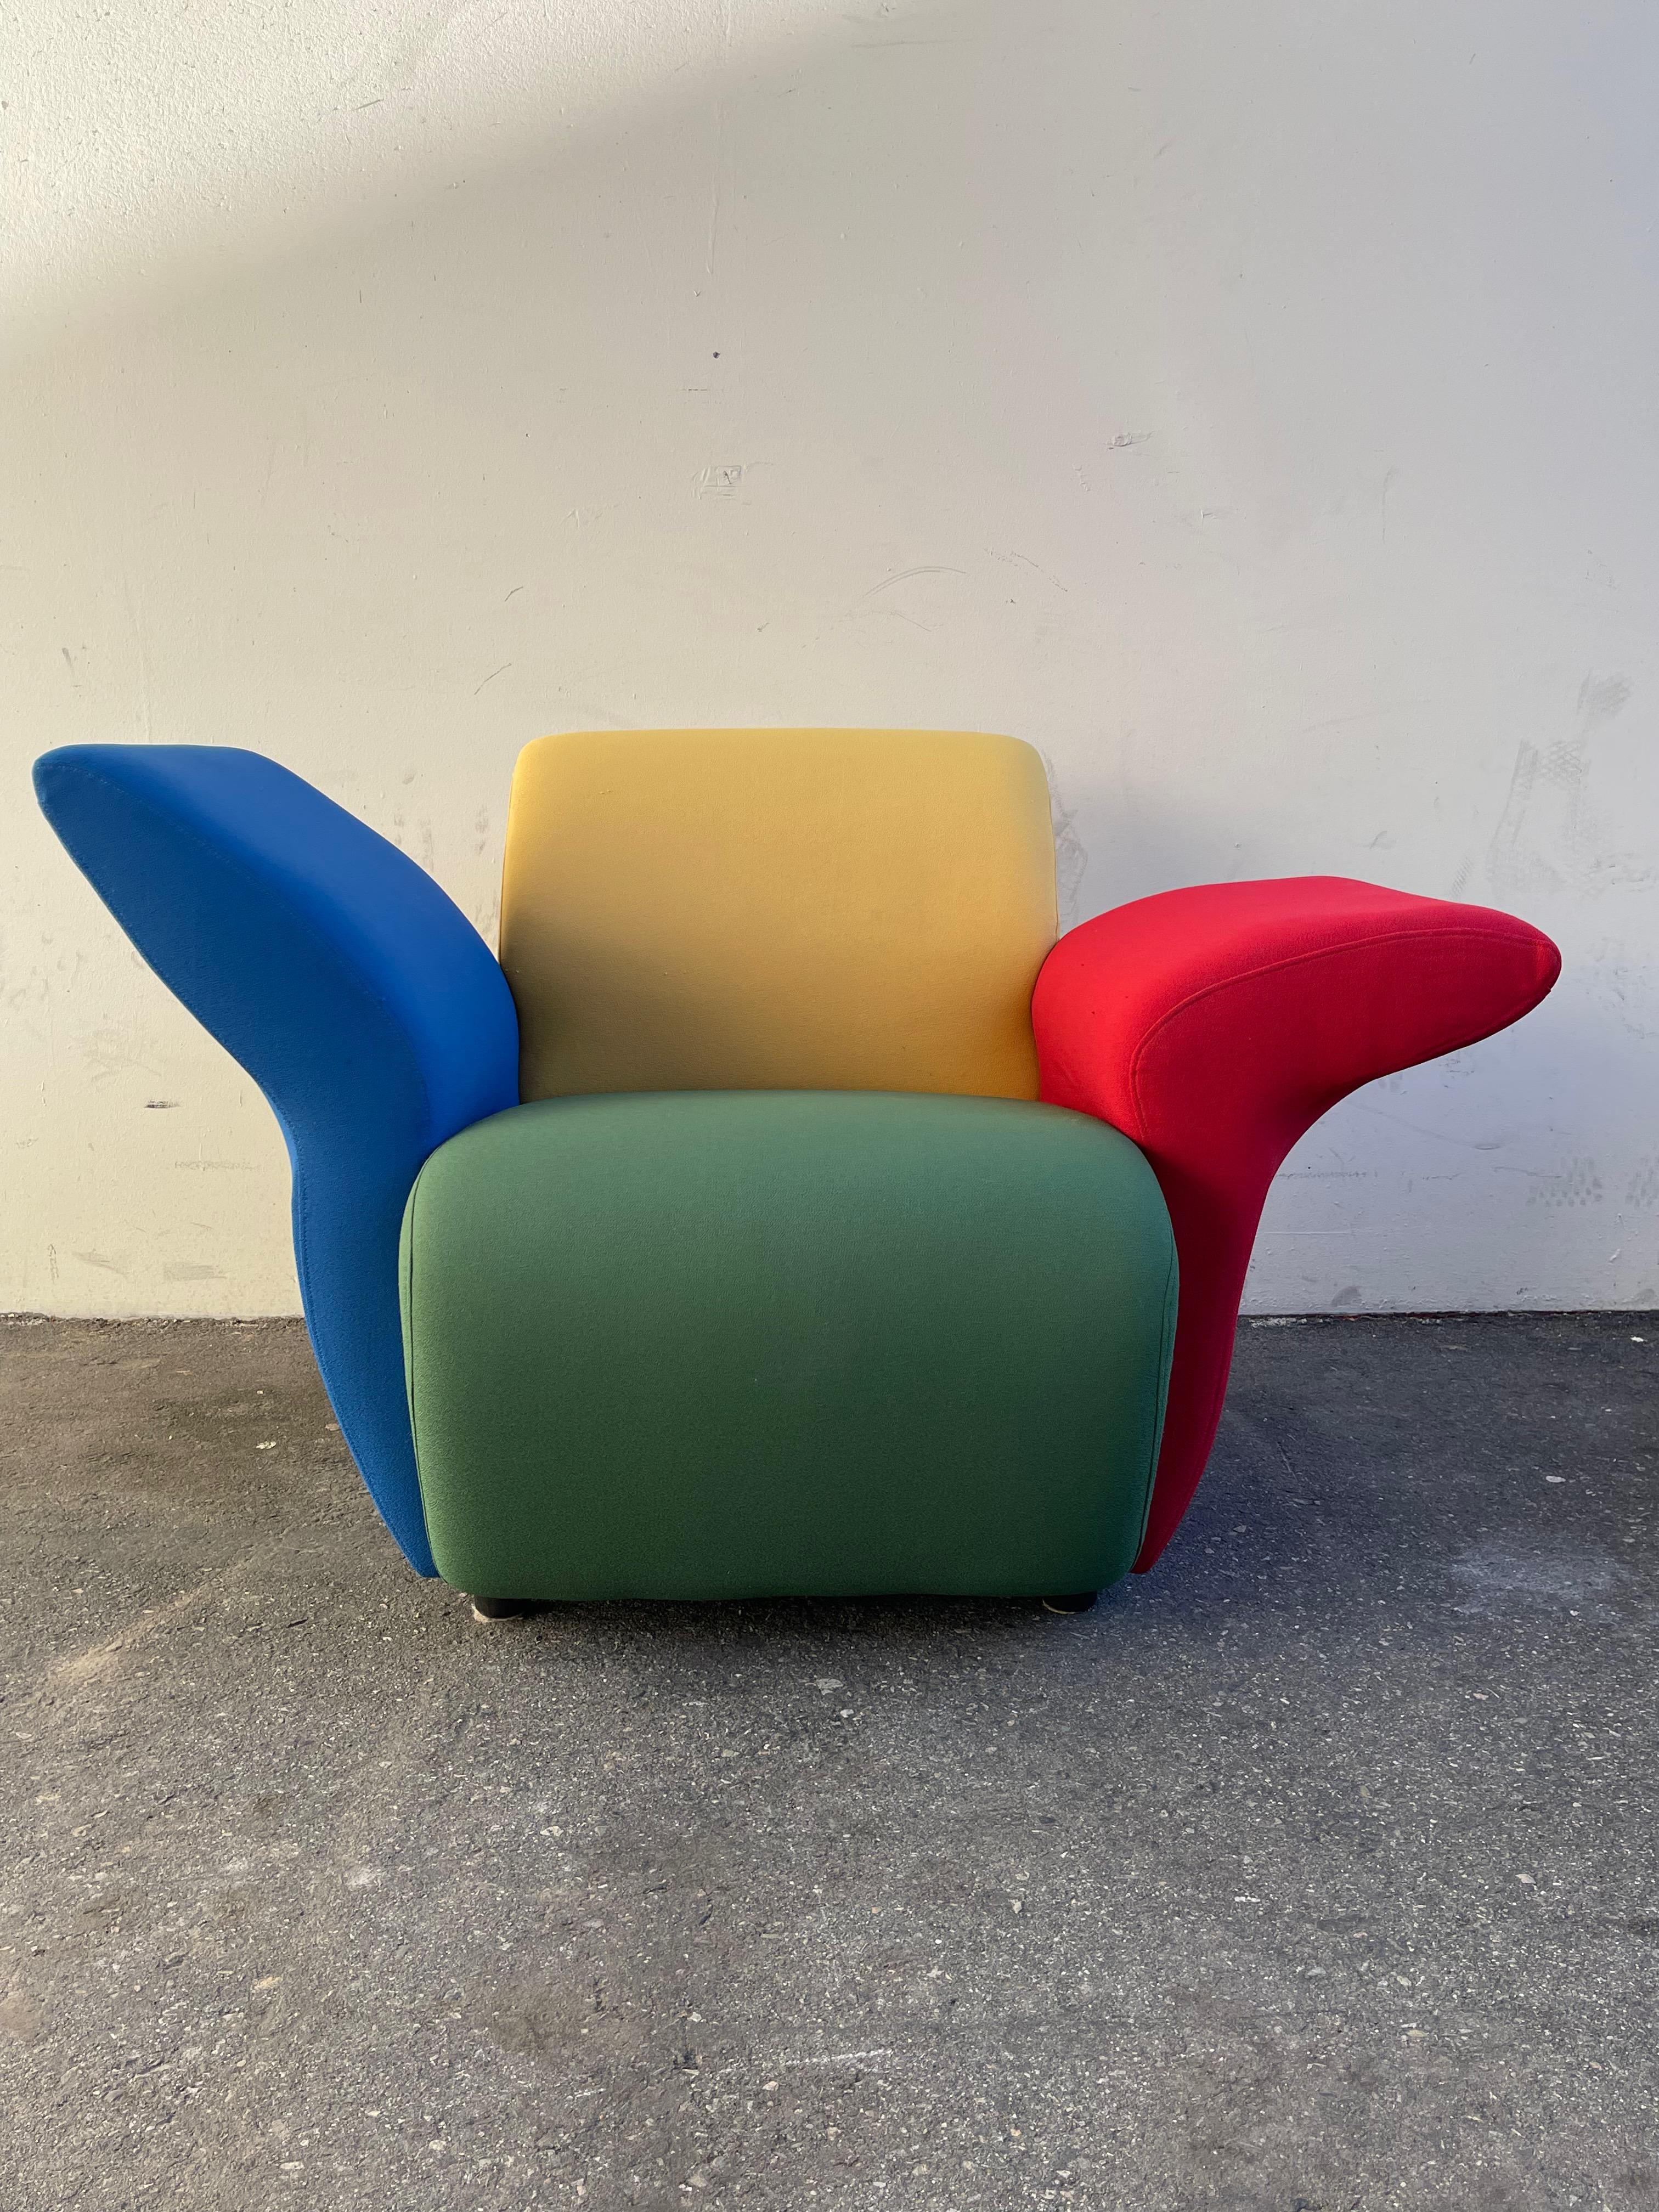 Late 20th Century Postmodern Multicolor Lounge Chairs by David Burry, Montreal, 1980s For Sale